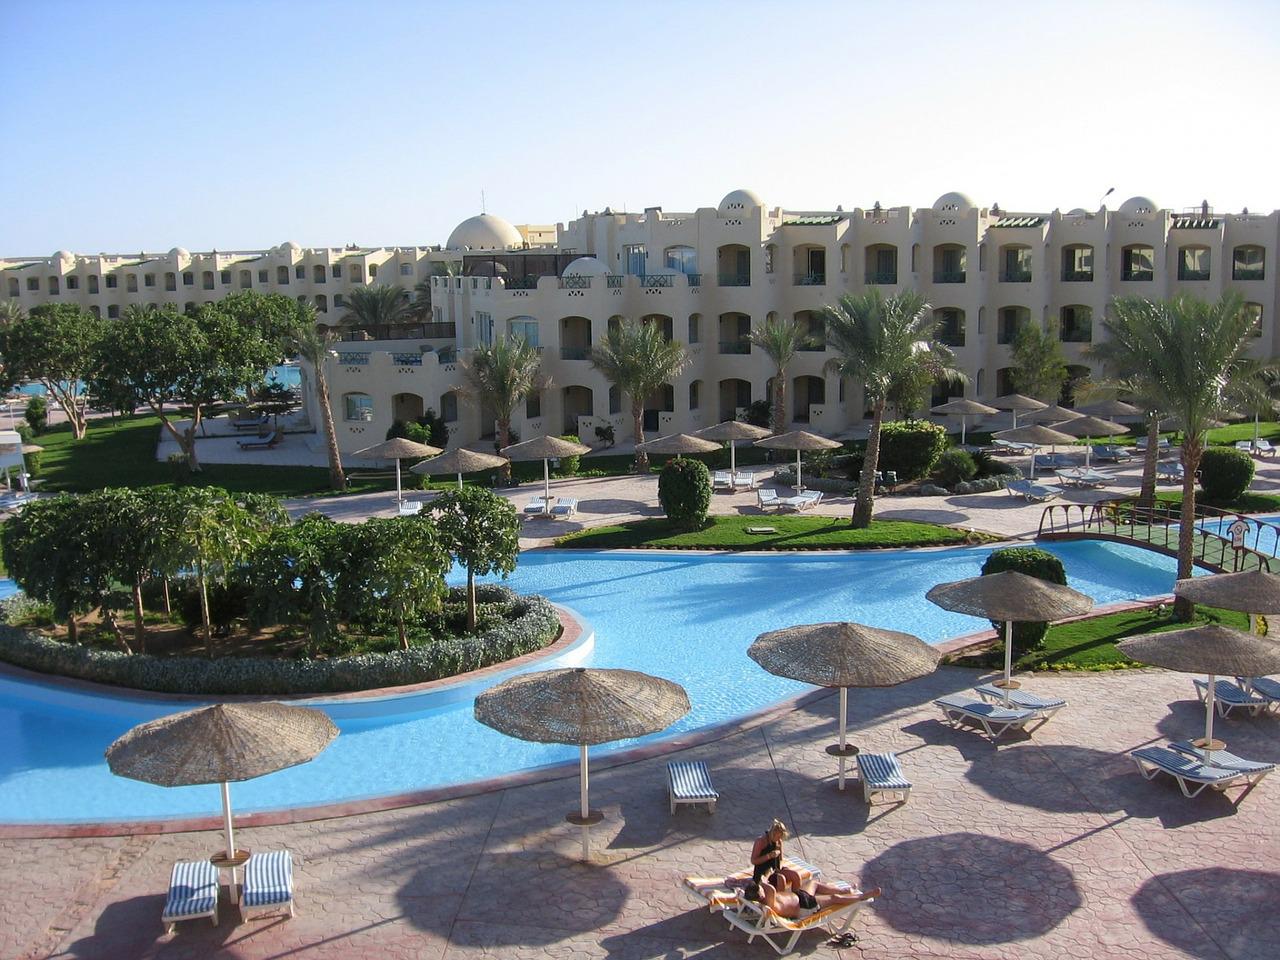 Sahl haschisch may be a freshly developed resort placed south of Hurghada on the Red Sea